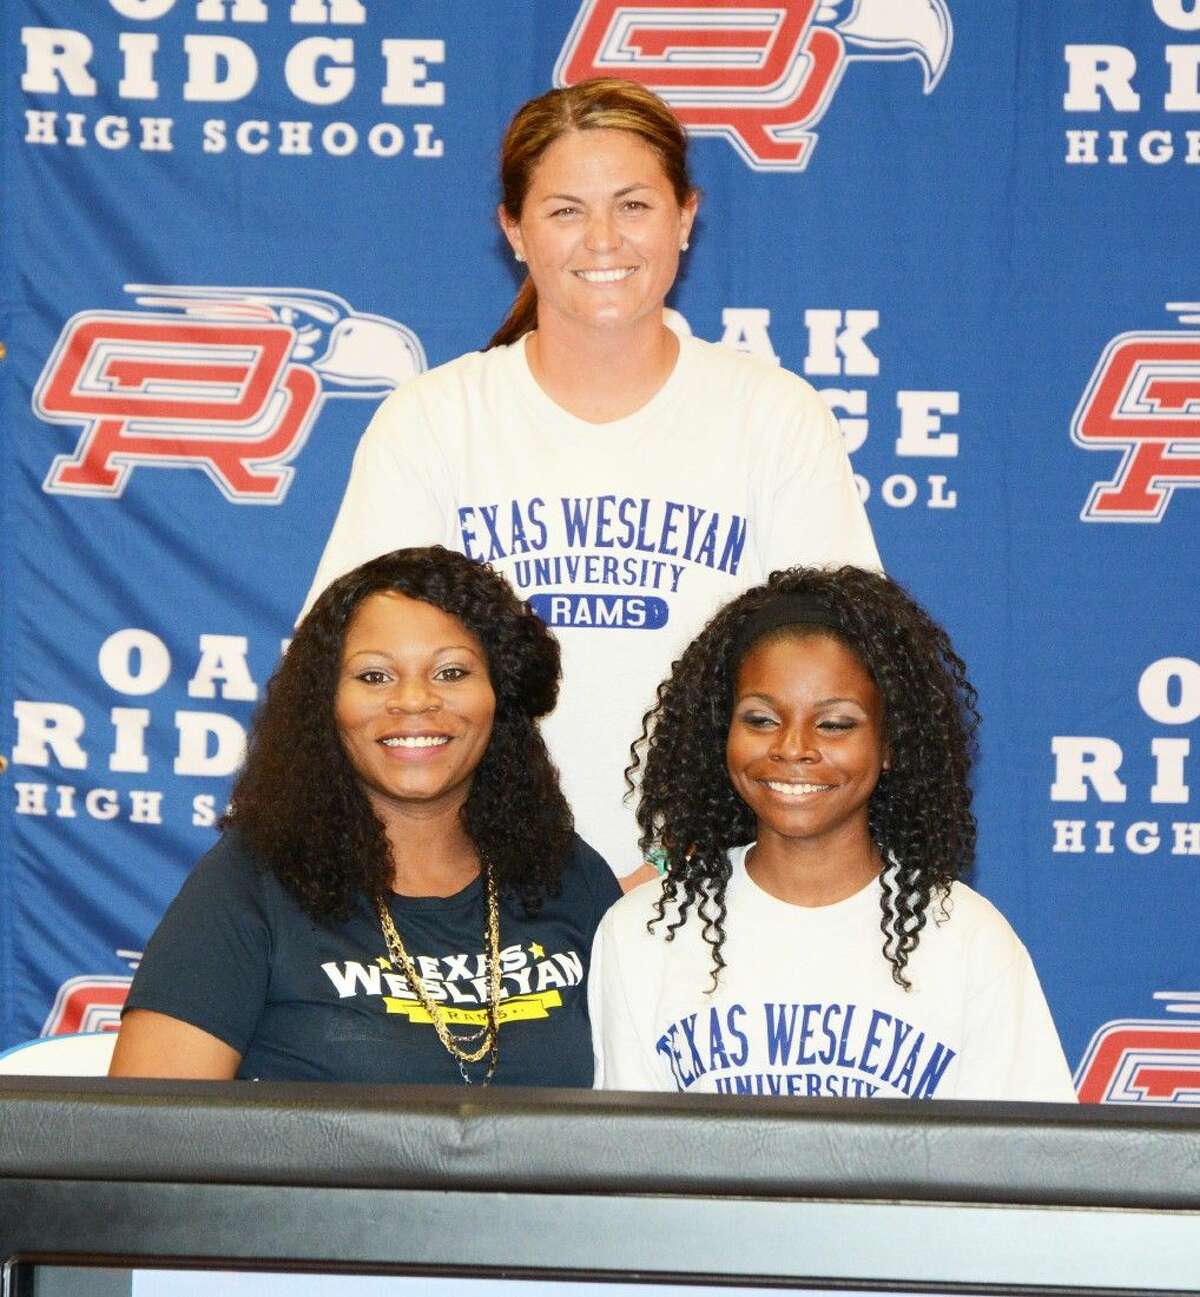 Oak Ridge’s Kaelah Brewer (front right) poses with her family and coach Kristina Dube (back) after signing her National Letter of Intent to run track at Texas Wesleyan University.